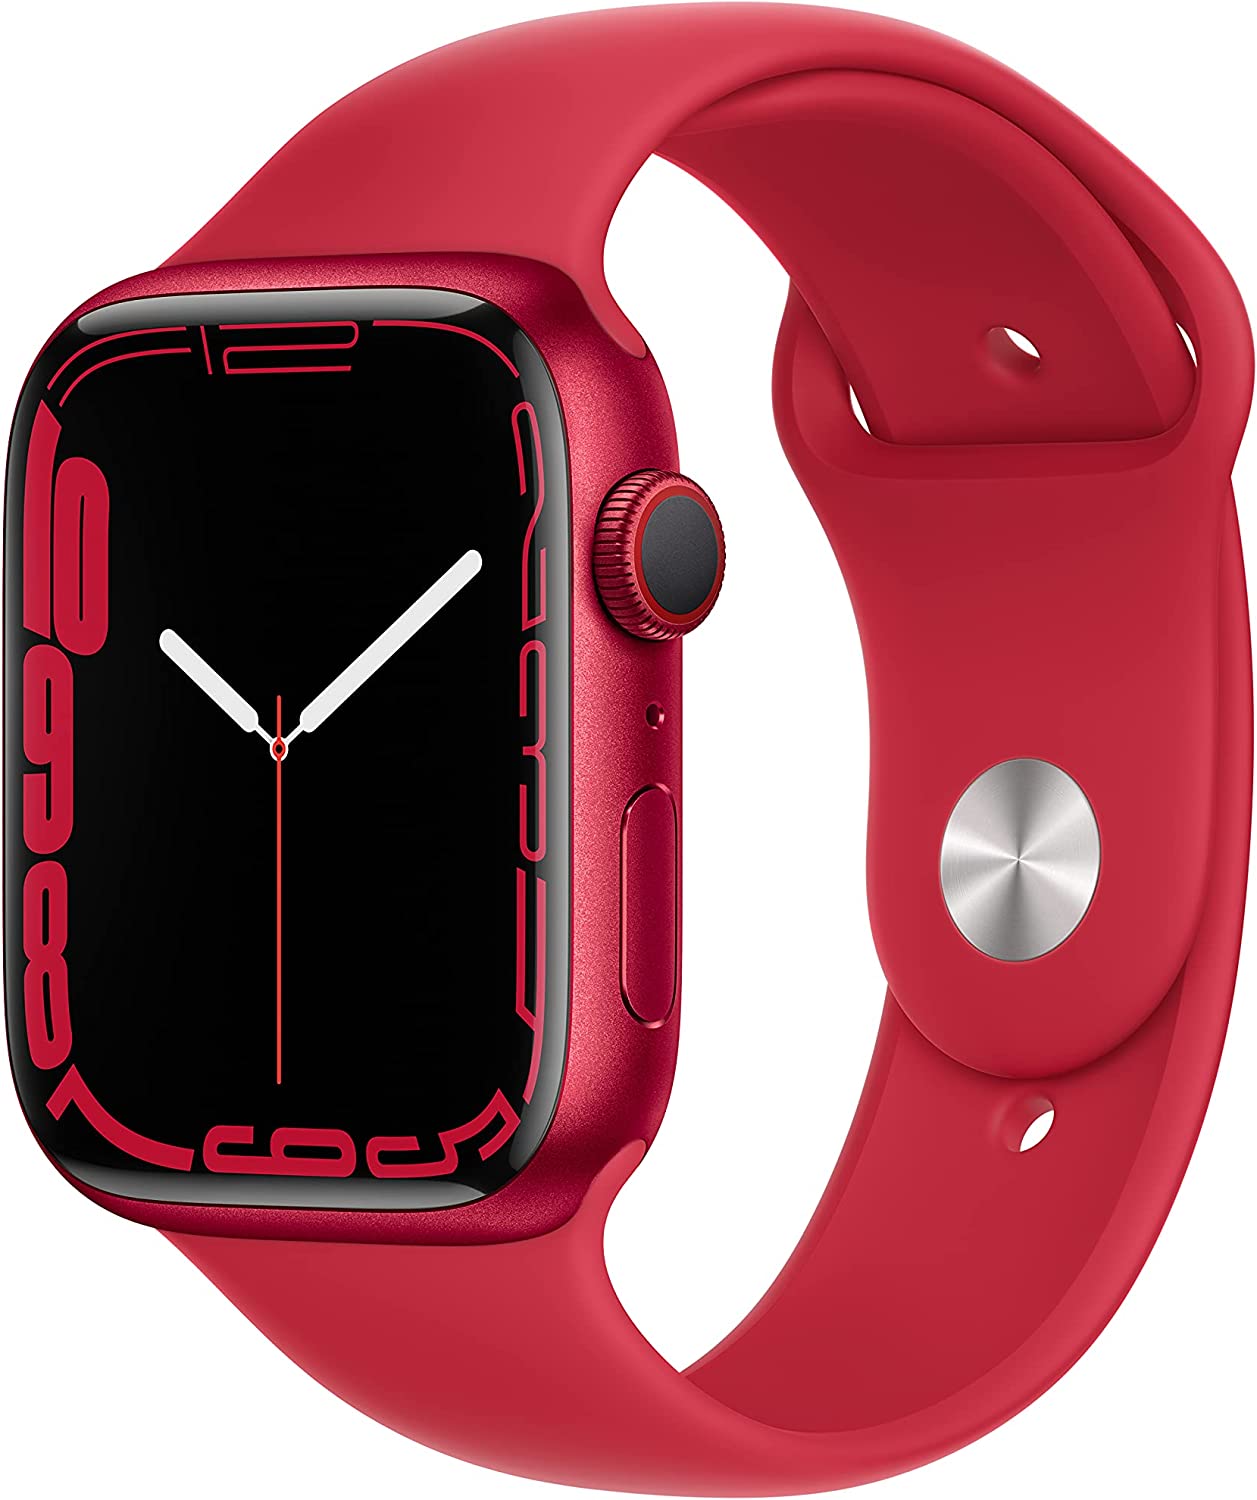 Apple Watch Series 7 with smart features